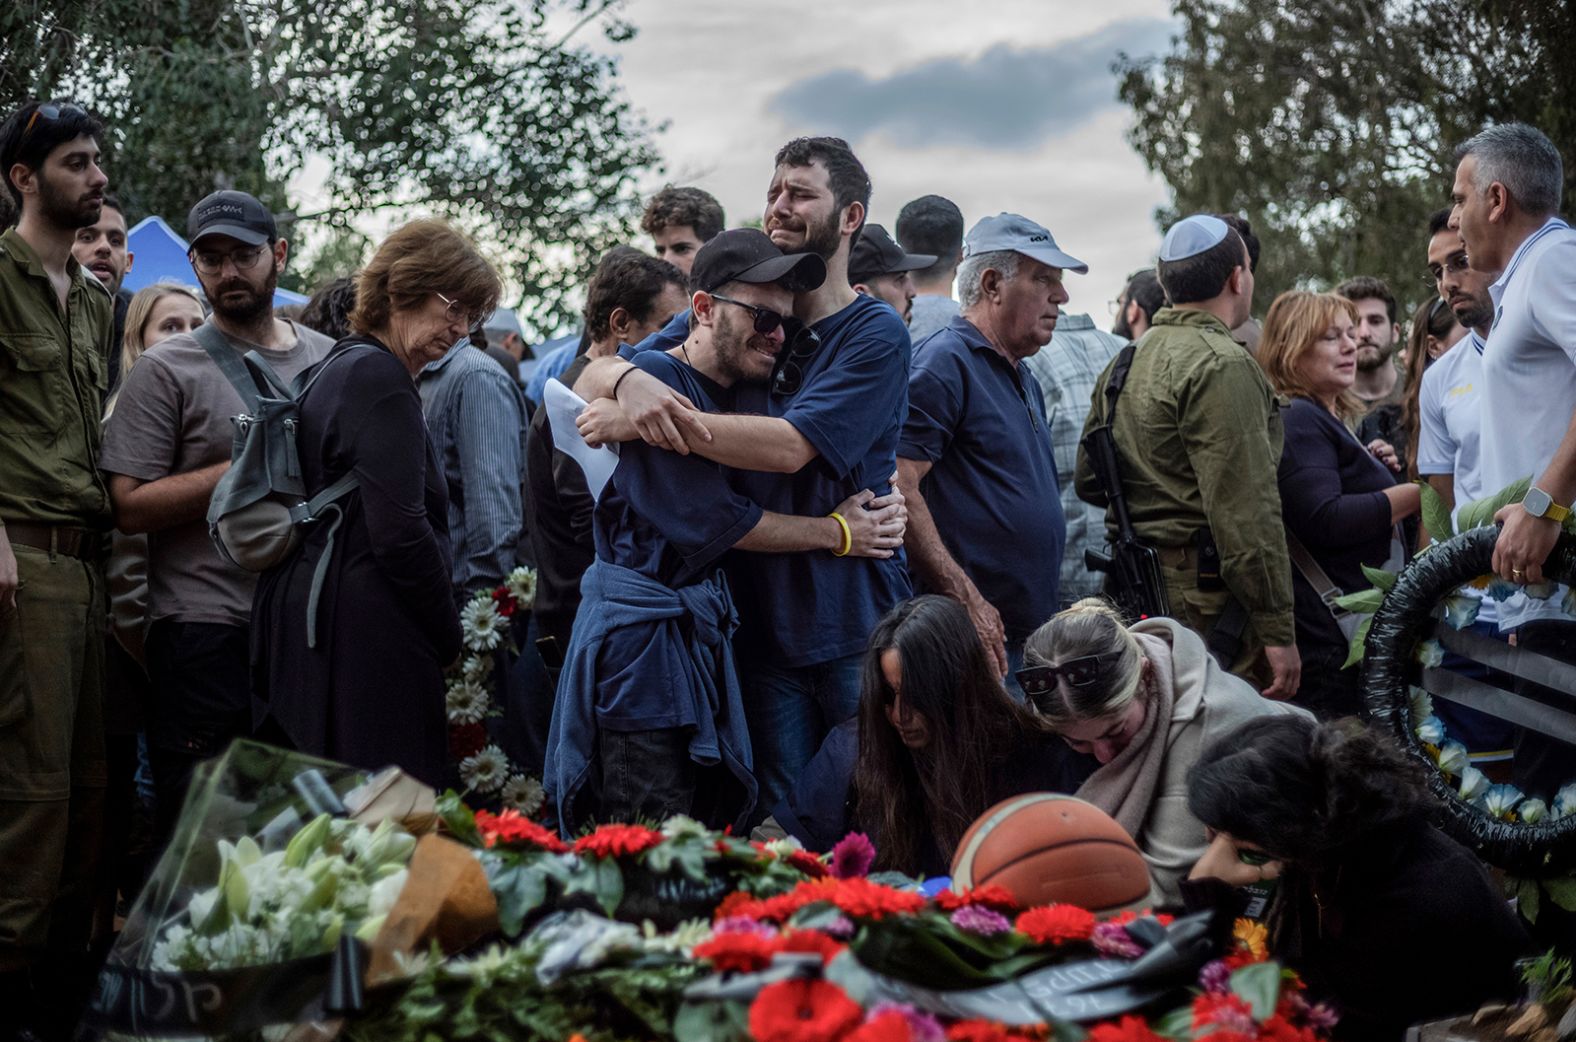 Relatives and friends of Alon Lulu Shamriz, one of the 3 Israeli hostages who were mistakenly killed by friendly fire, mourn during his funeral in Shefayim, Israel on December 17.